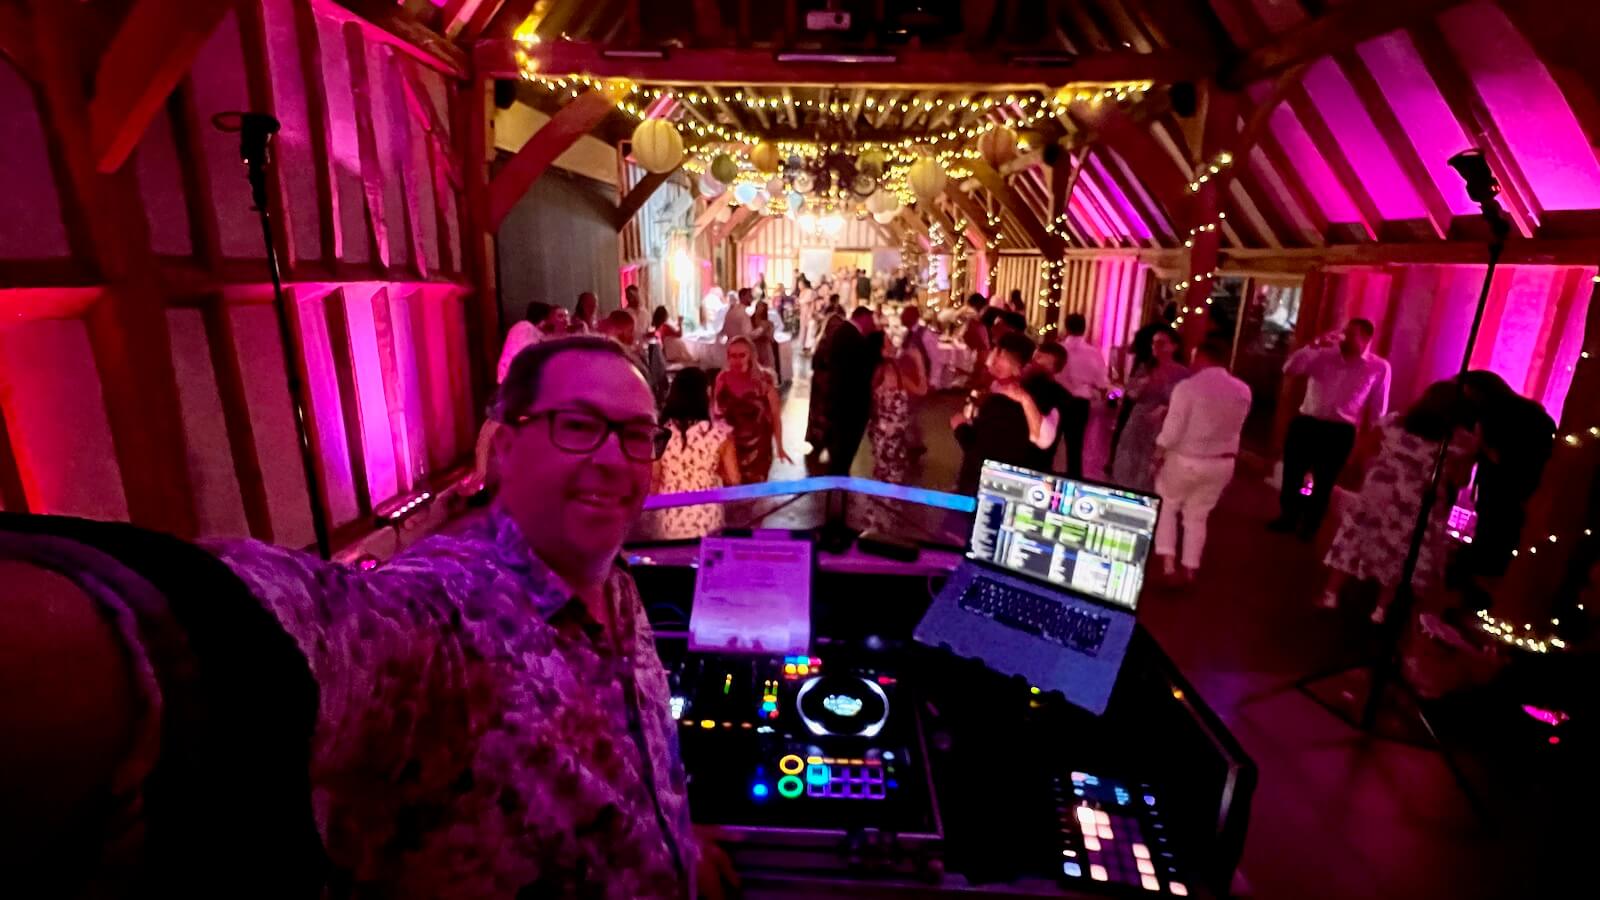 Brian DJing at Southend Barns for Rhianna and Harry